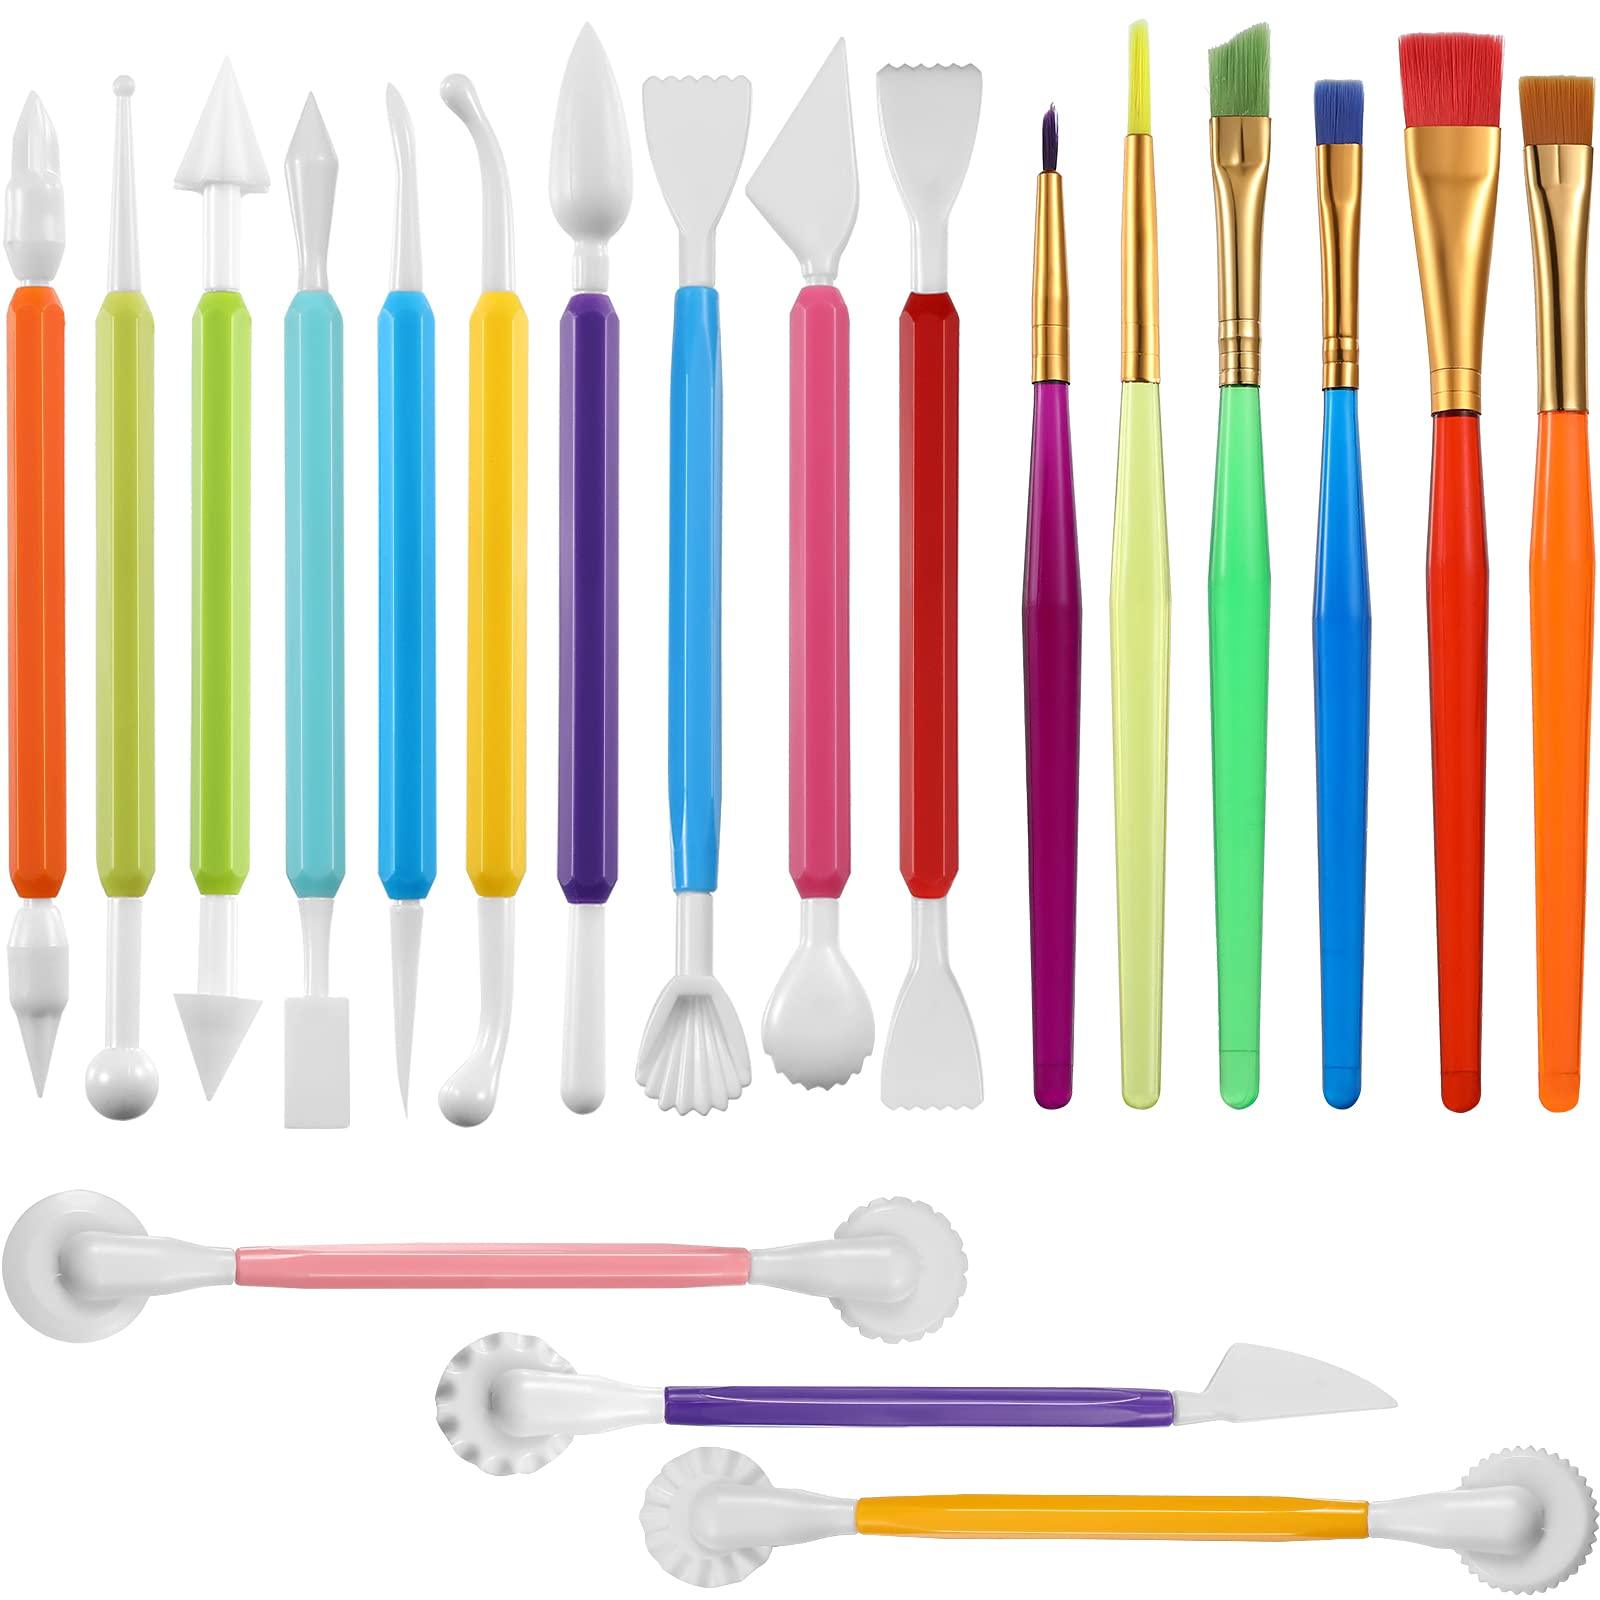 19 Pieces Cake Decorating Tools,Cookie Fondant Modeling Set,Marshmallow Sculpting Brush and Fondant Modeling Tools for DIY Cake Sugar Gum Paste Decorating Supplies - CookCave